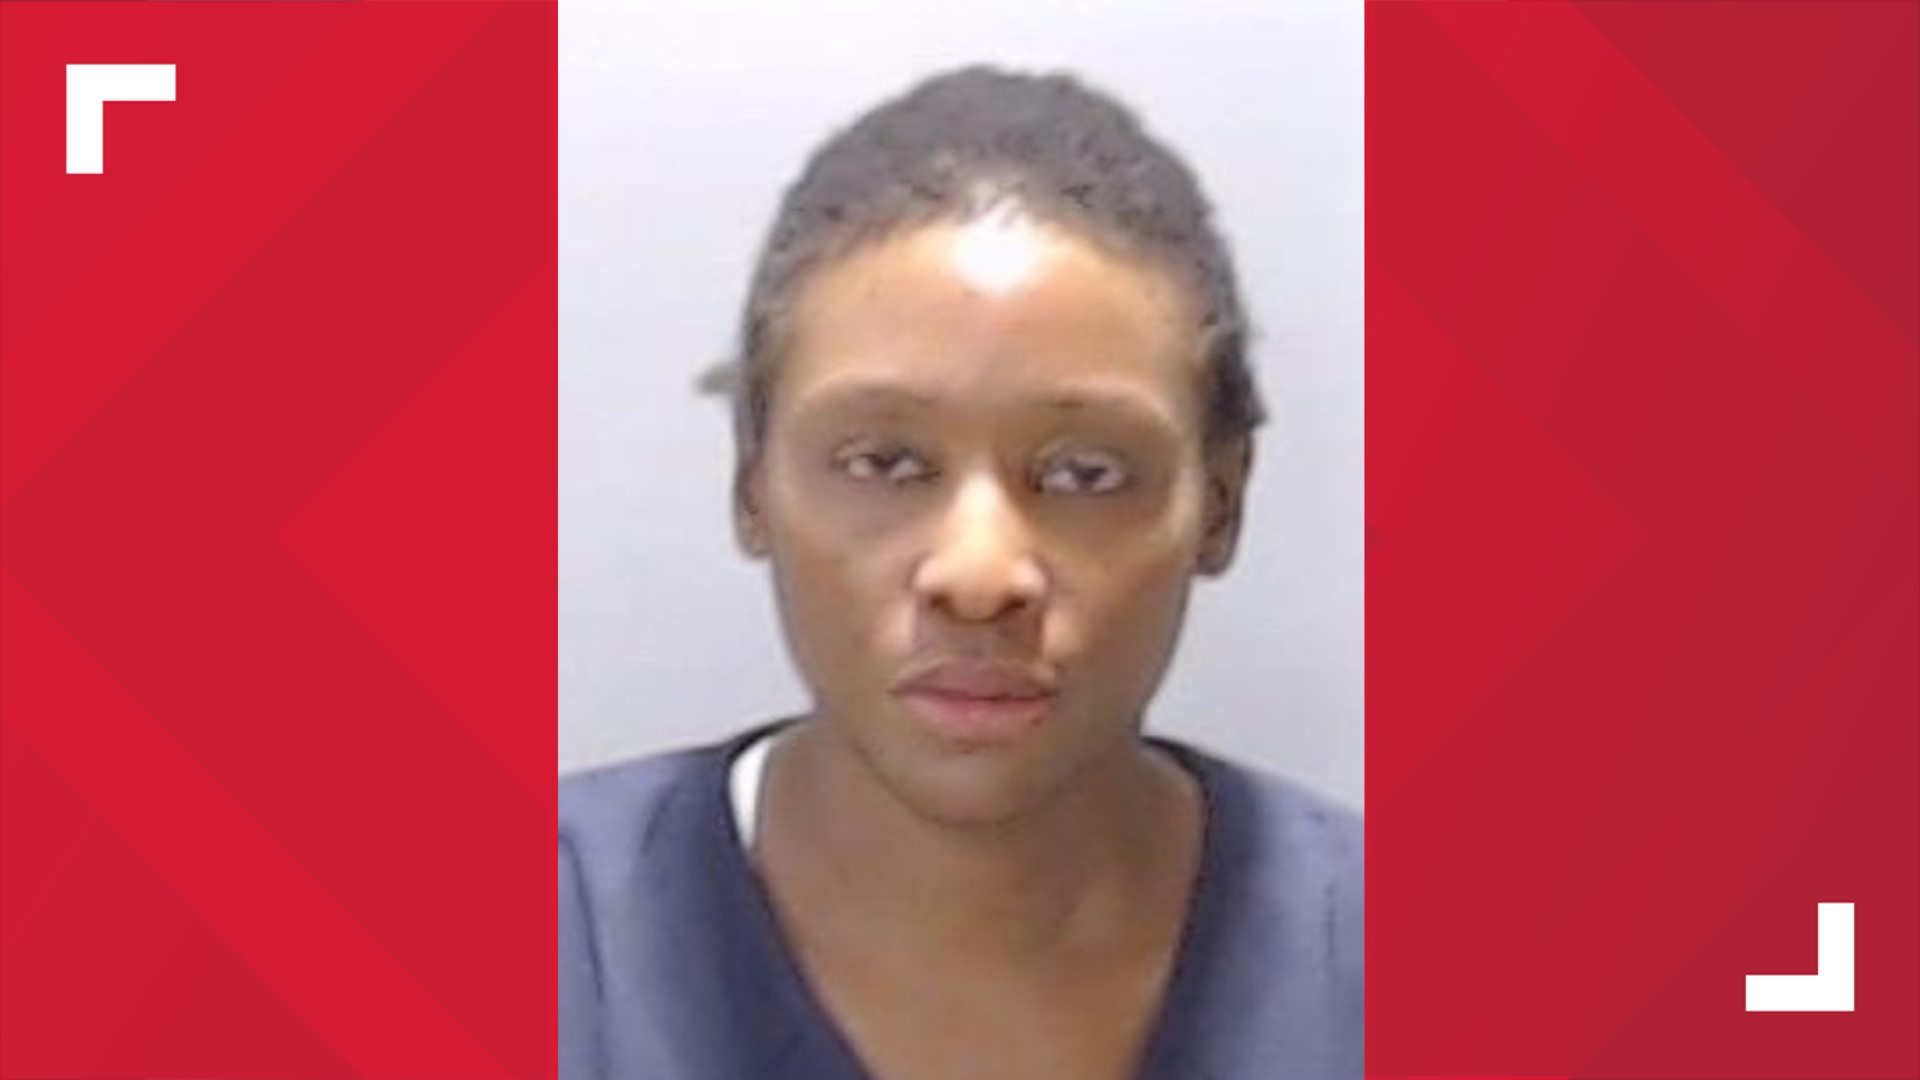 Raissa Kengne filed hundreds of pages of court documents in the past two years. She's accused in the deadly shooting in Midtown Atlanta.